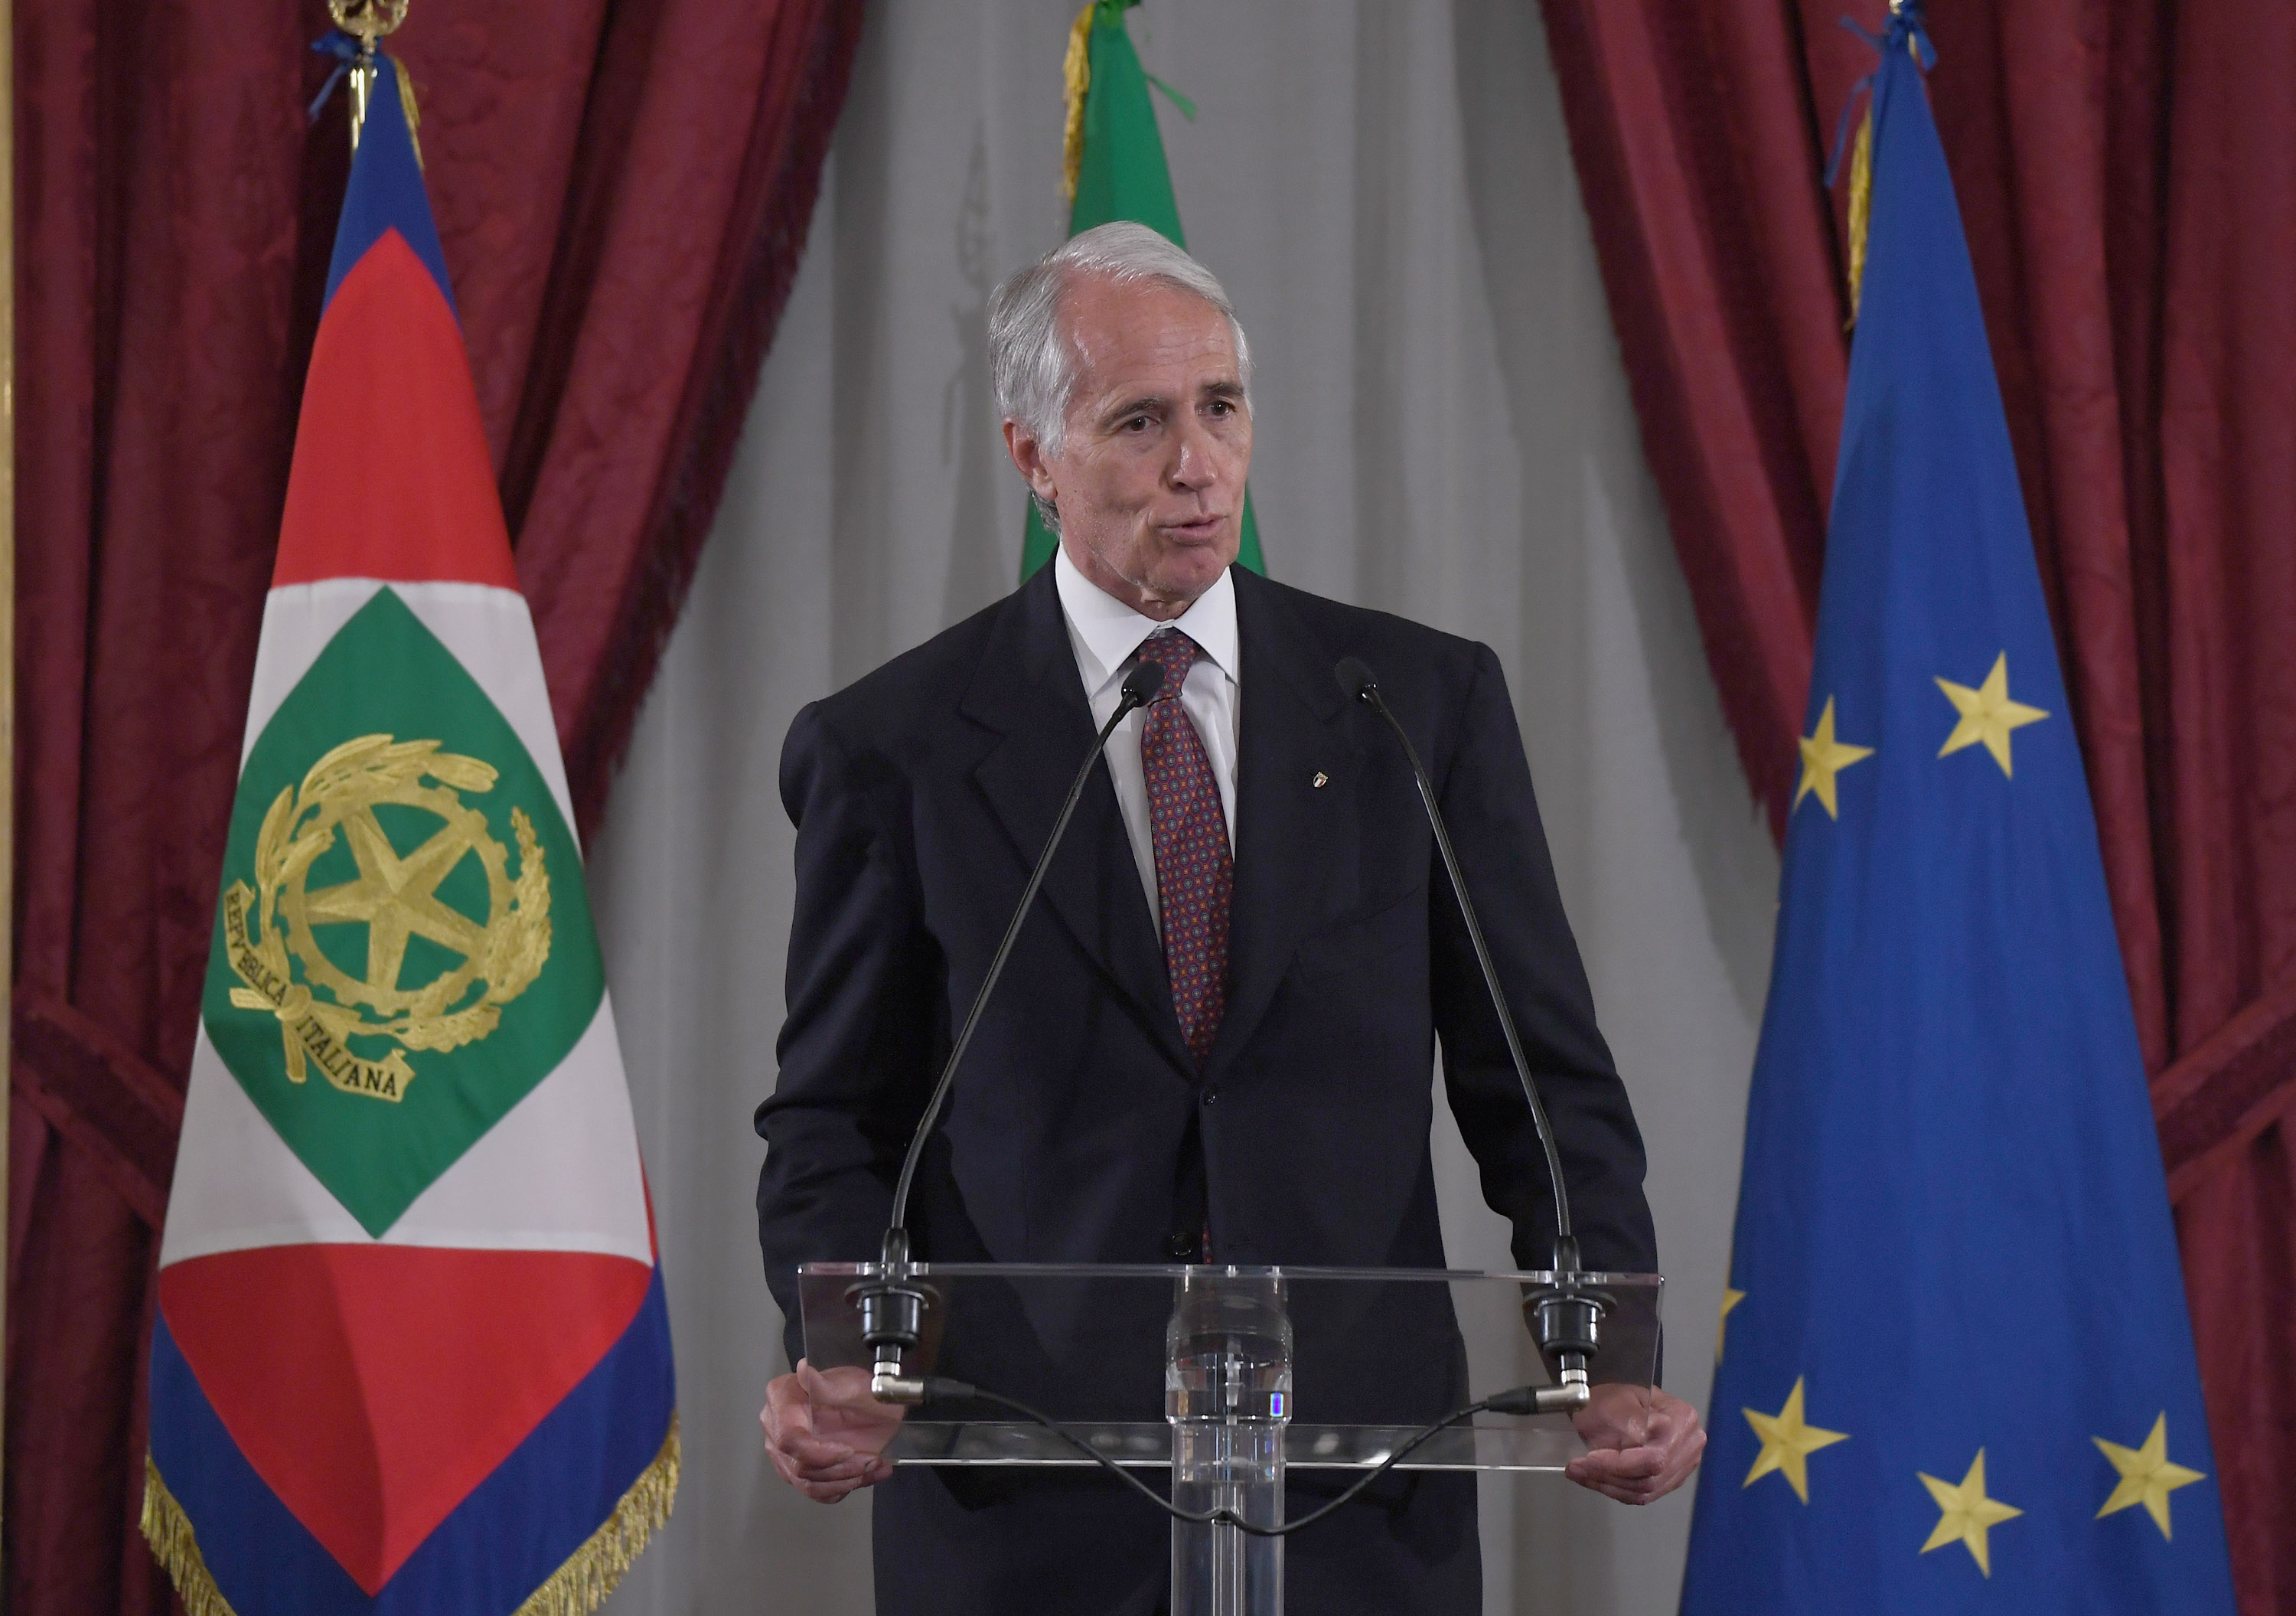 ROME, ITALY - MAY 14:  CONI President Giovanni Malagò attends during Team's Delegations Meet President Sergio Mattarella at Palazzo del Quirinale on May 14, 2019 in Rome, Italy.  (Photo by Claudio Villa/Getty Images for Lega Serie A)